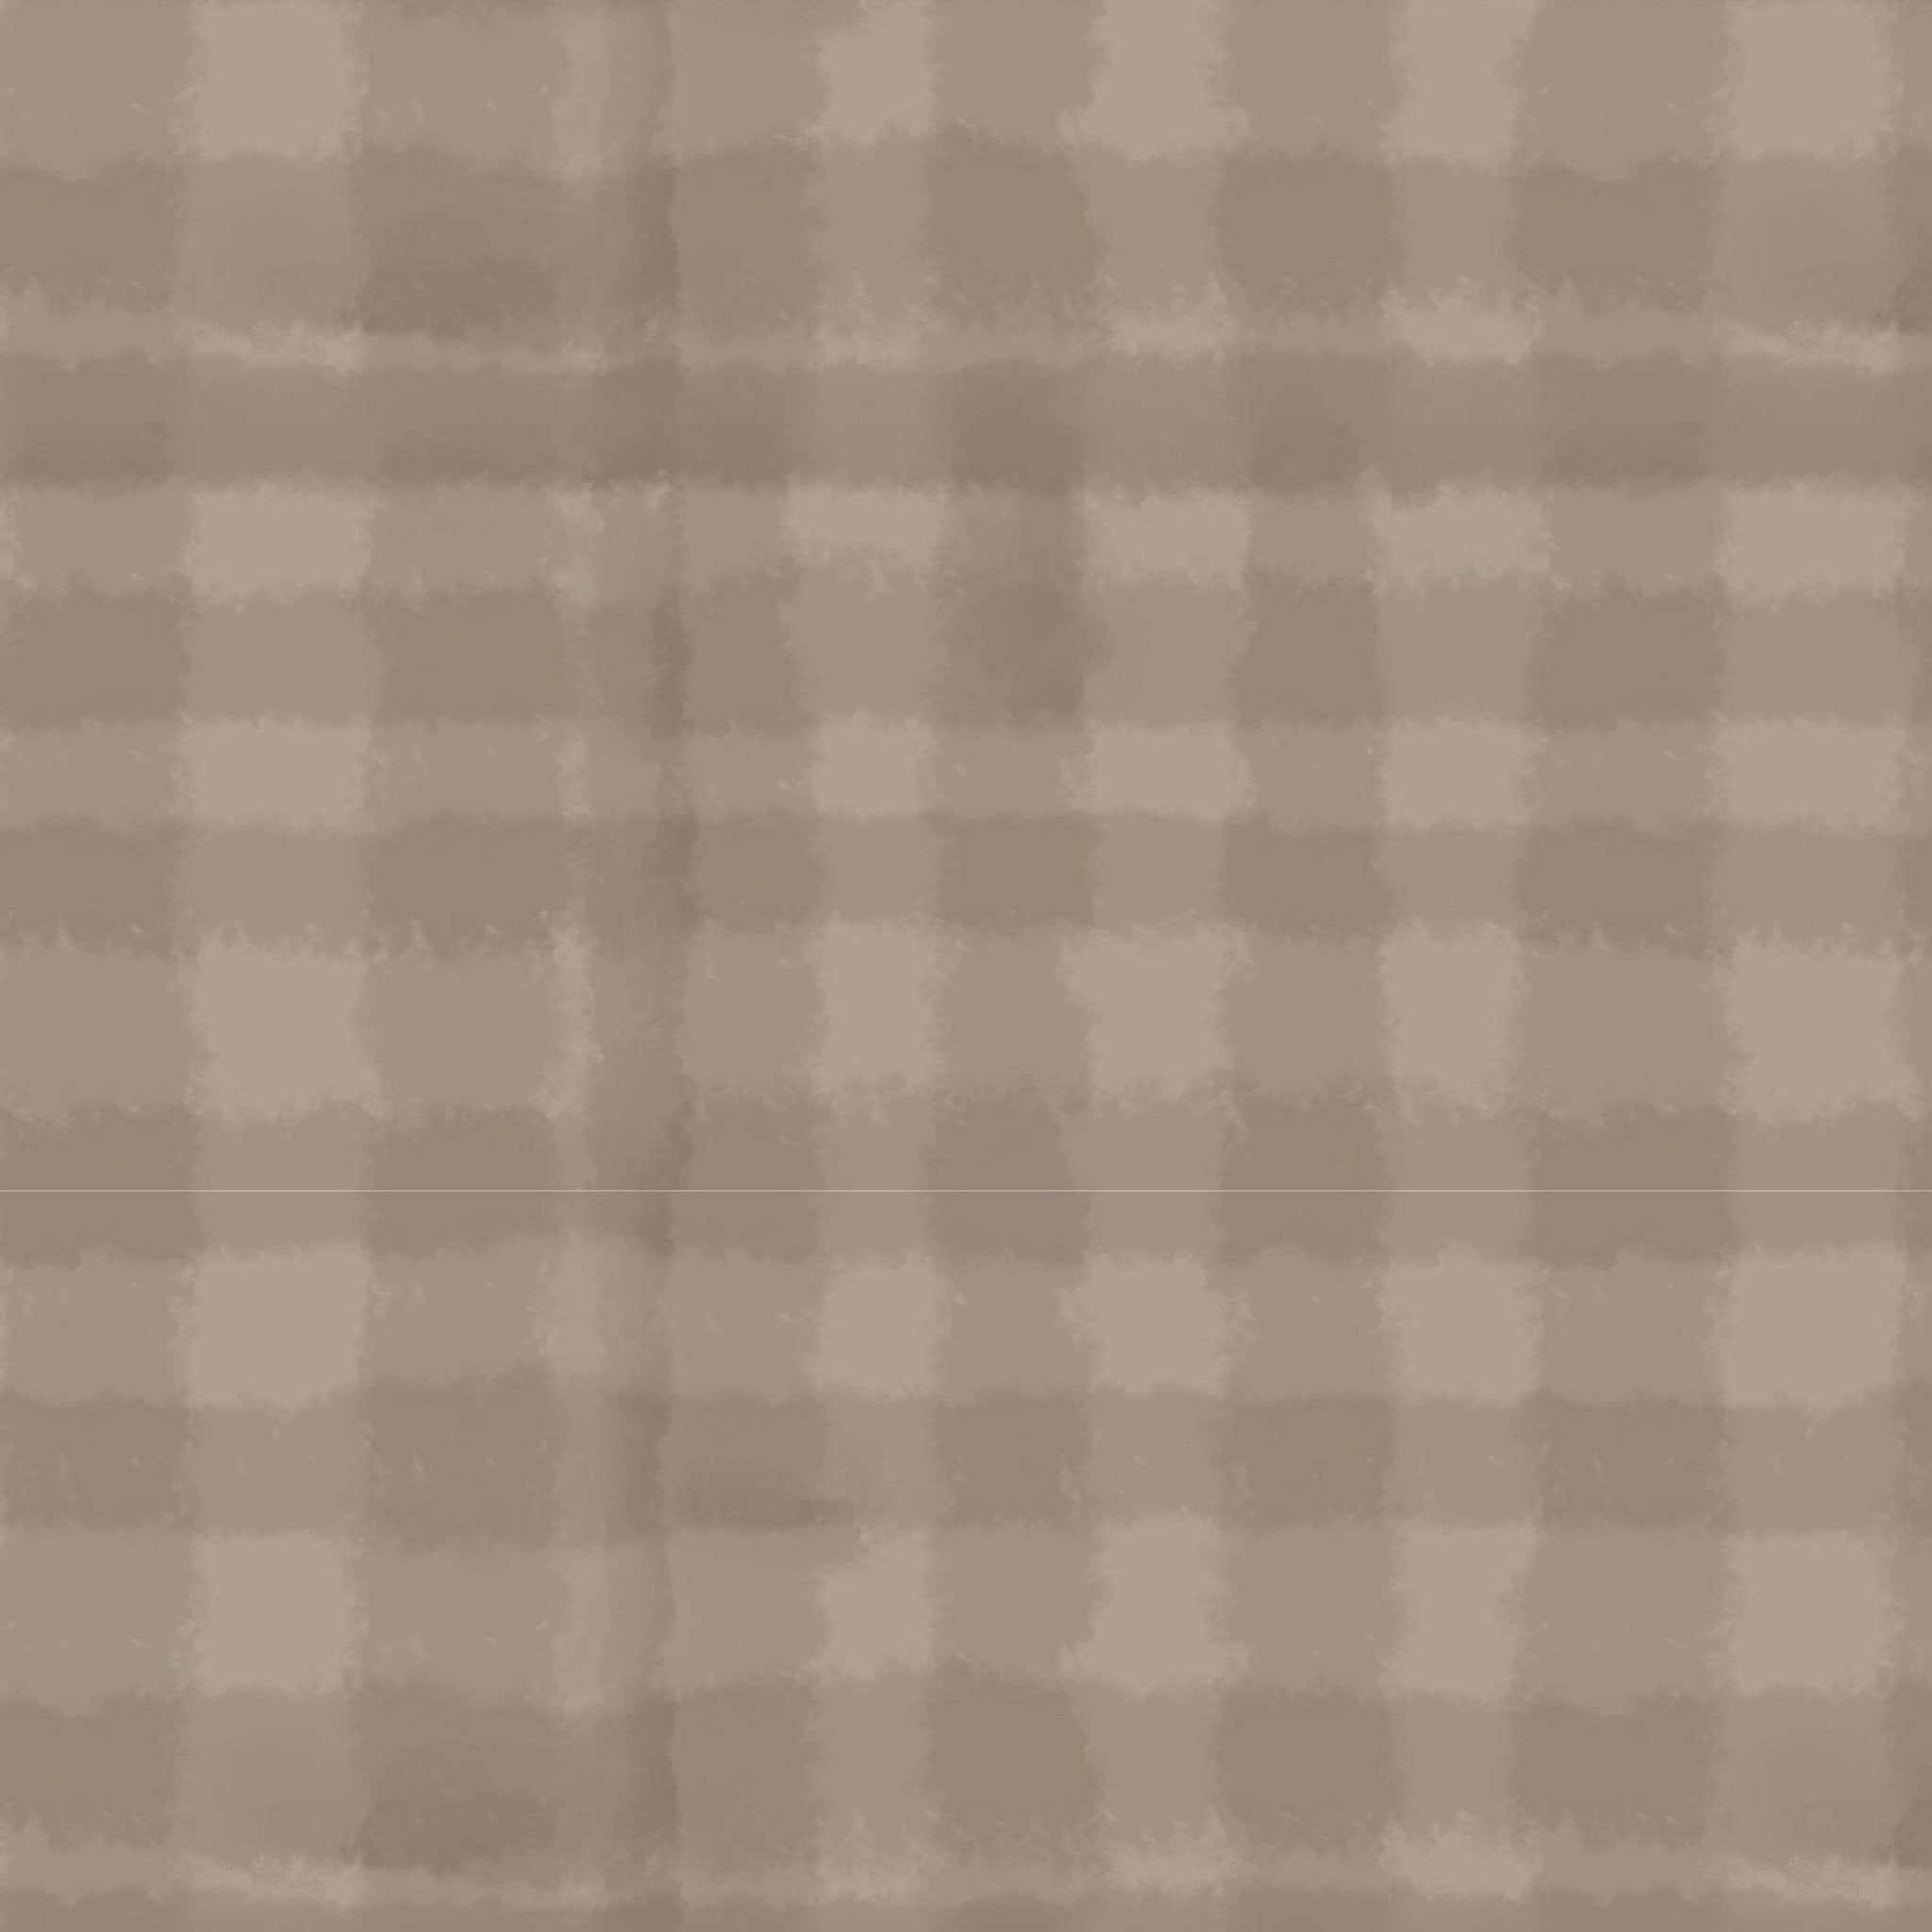 Sample of Plaid Gingham peel and stick wallpaper